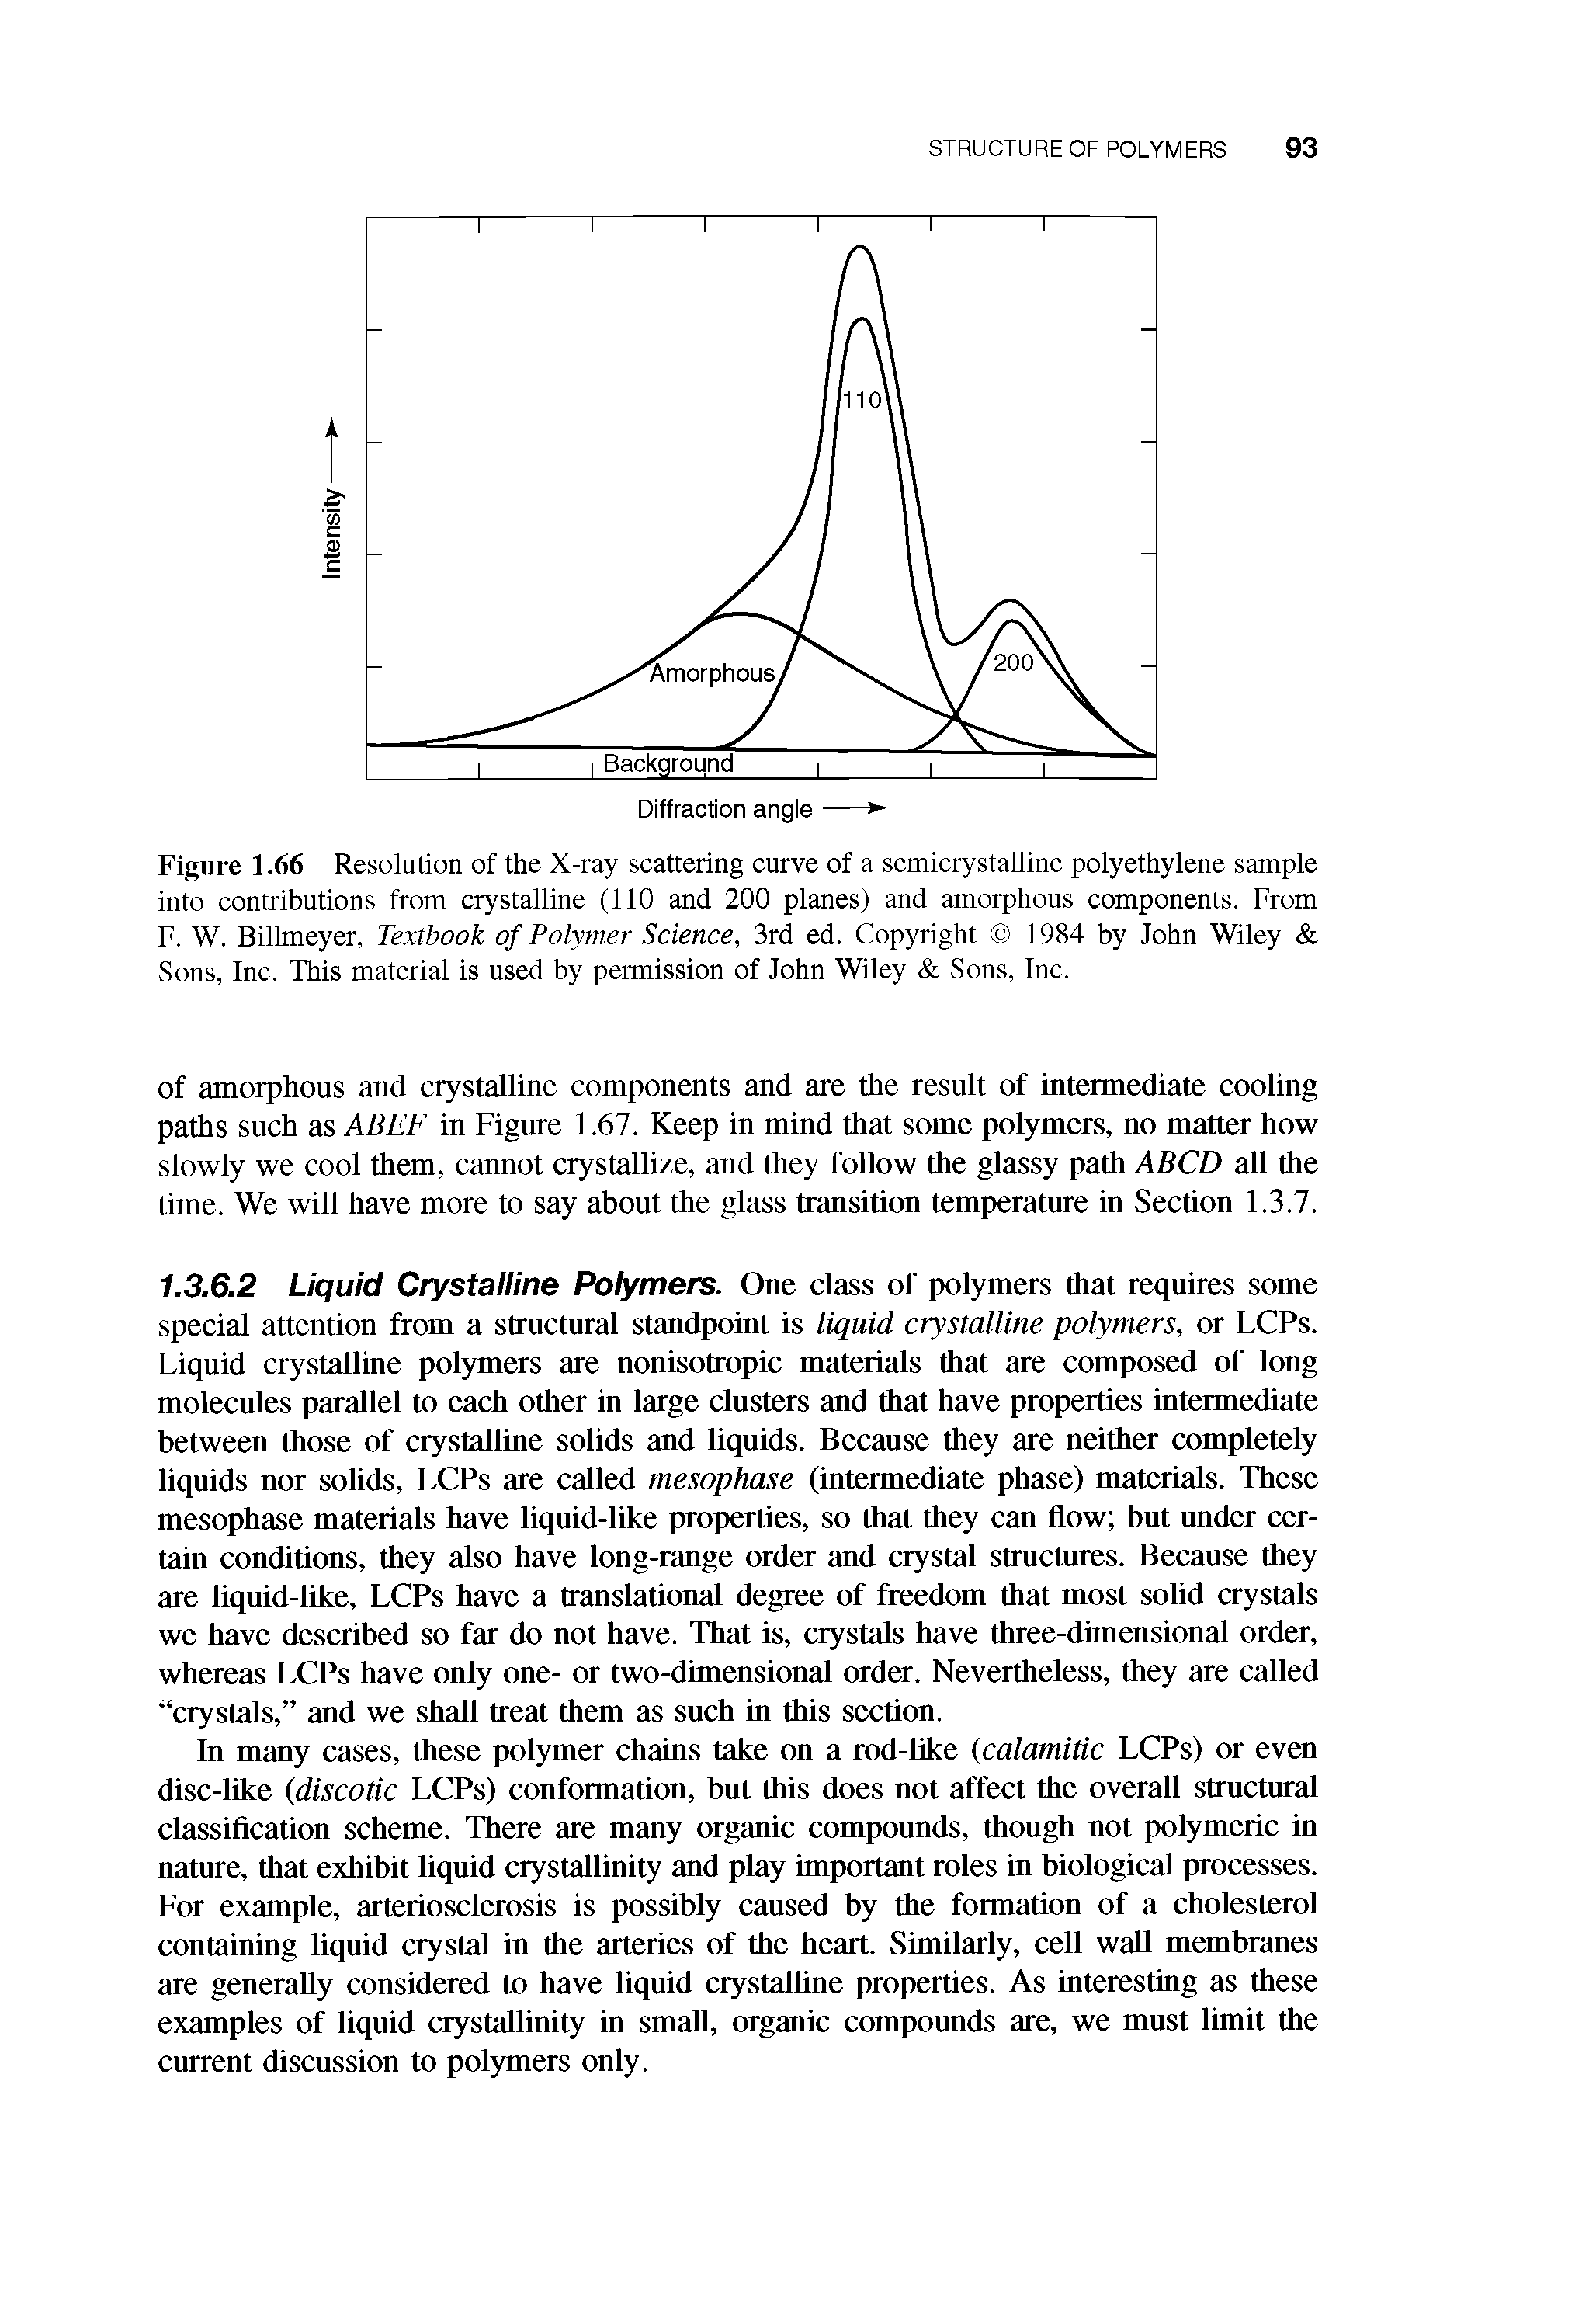 Figure 1.66 Resolution of the X-ray scattering curve of a semicrystalline polyethylene sample into contributions from crystalline (110 and 200 planes) and amorphous components. From F. W. Bilhneyer, Textbook of Polymer Science, 3rd ed. Copyright 1984 by John Wiley Sons, Inc. This material is used by permission of John Wiley Sons, Inc.